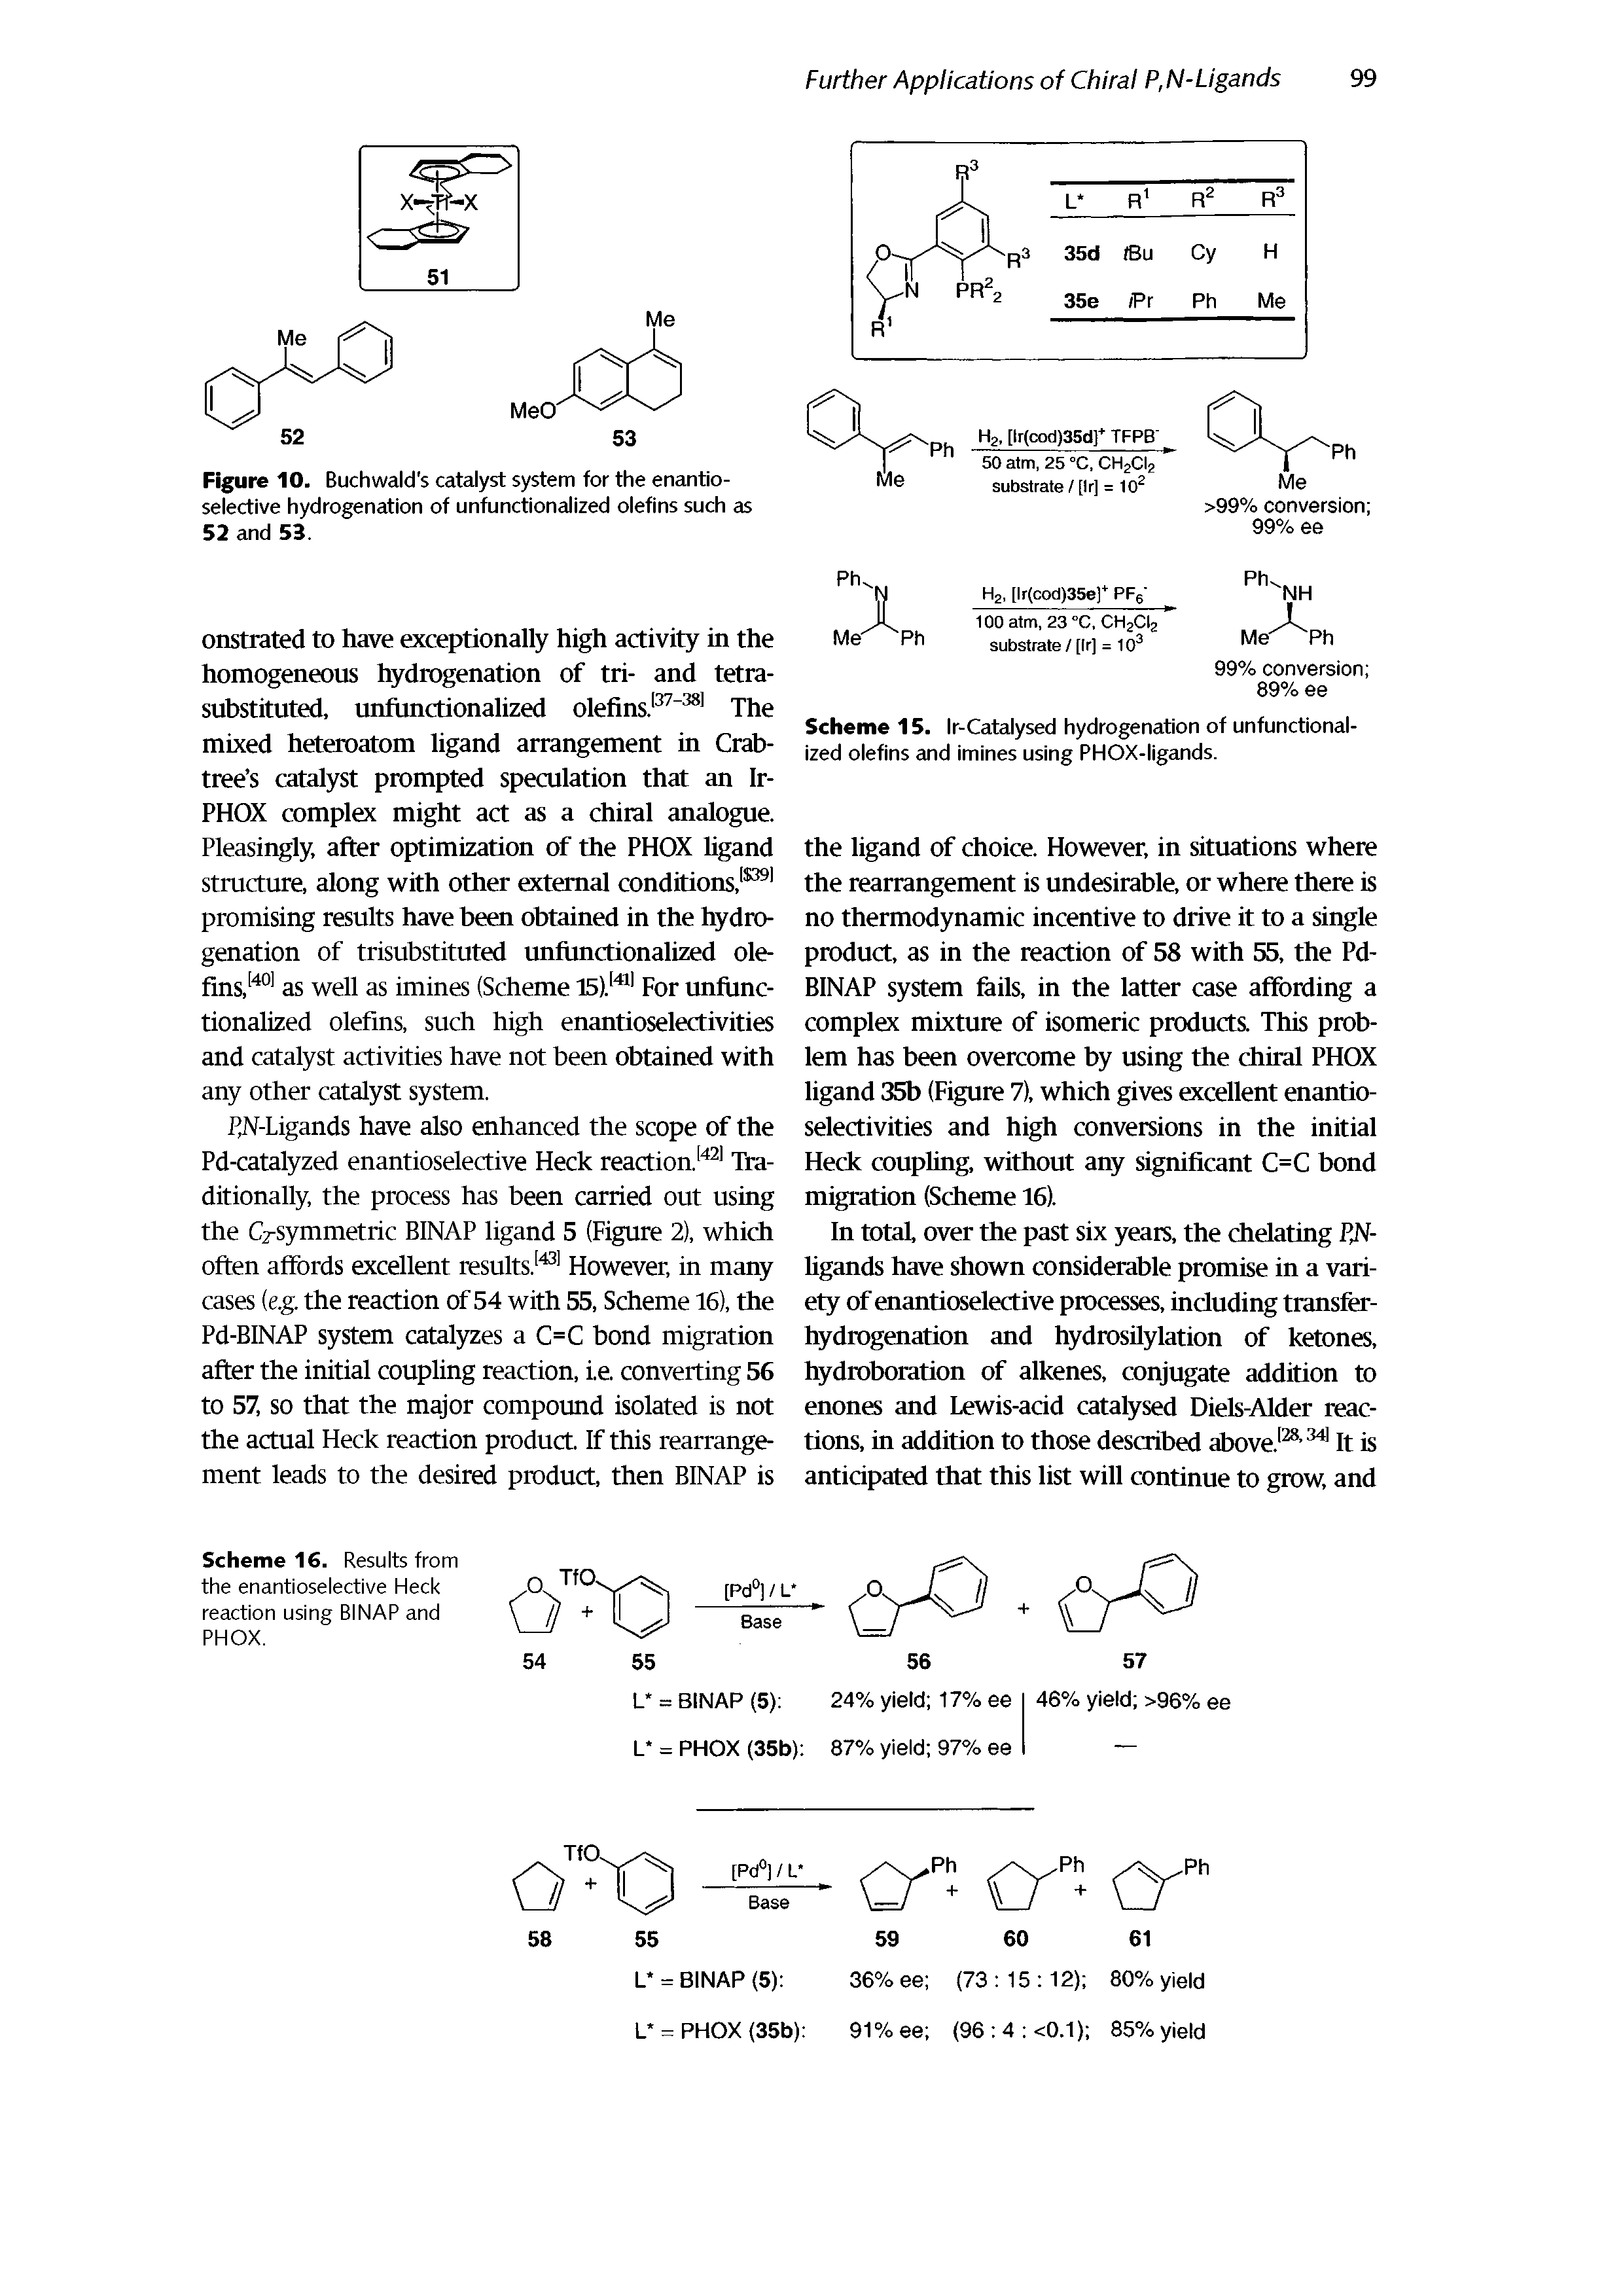 Figure 10. Buchwald s catalyst system for the enantio-selective hydrogenation of unfunctionalized olefins such as 52 and 53.